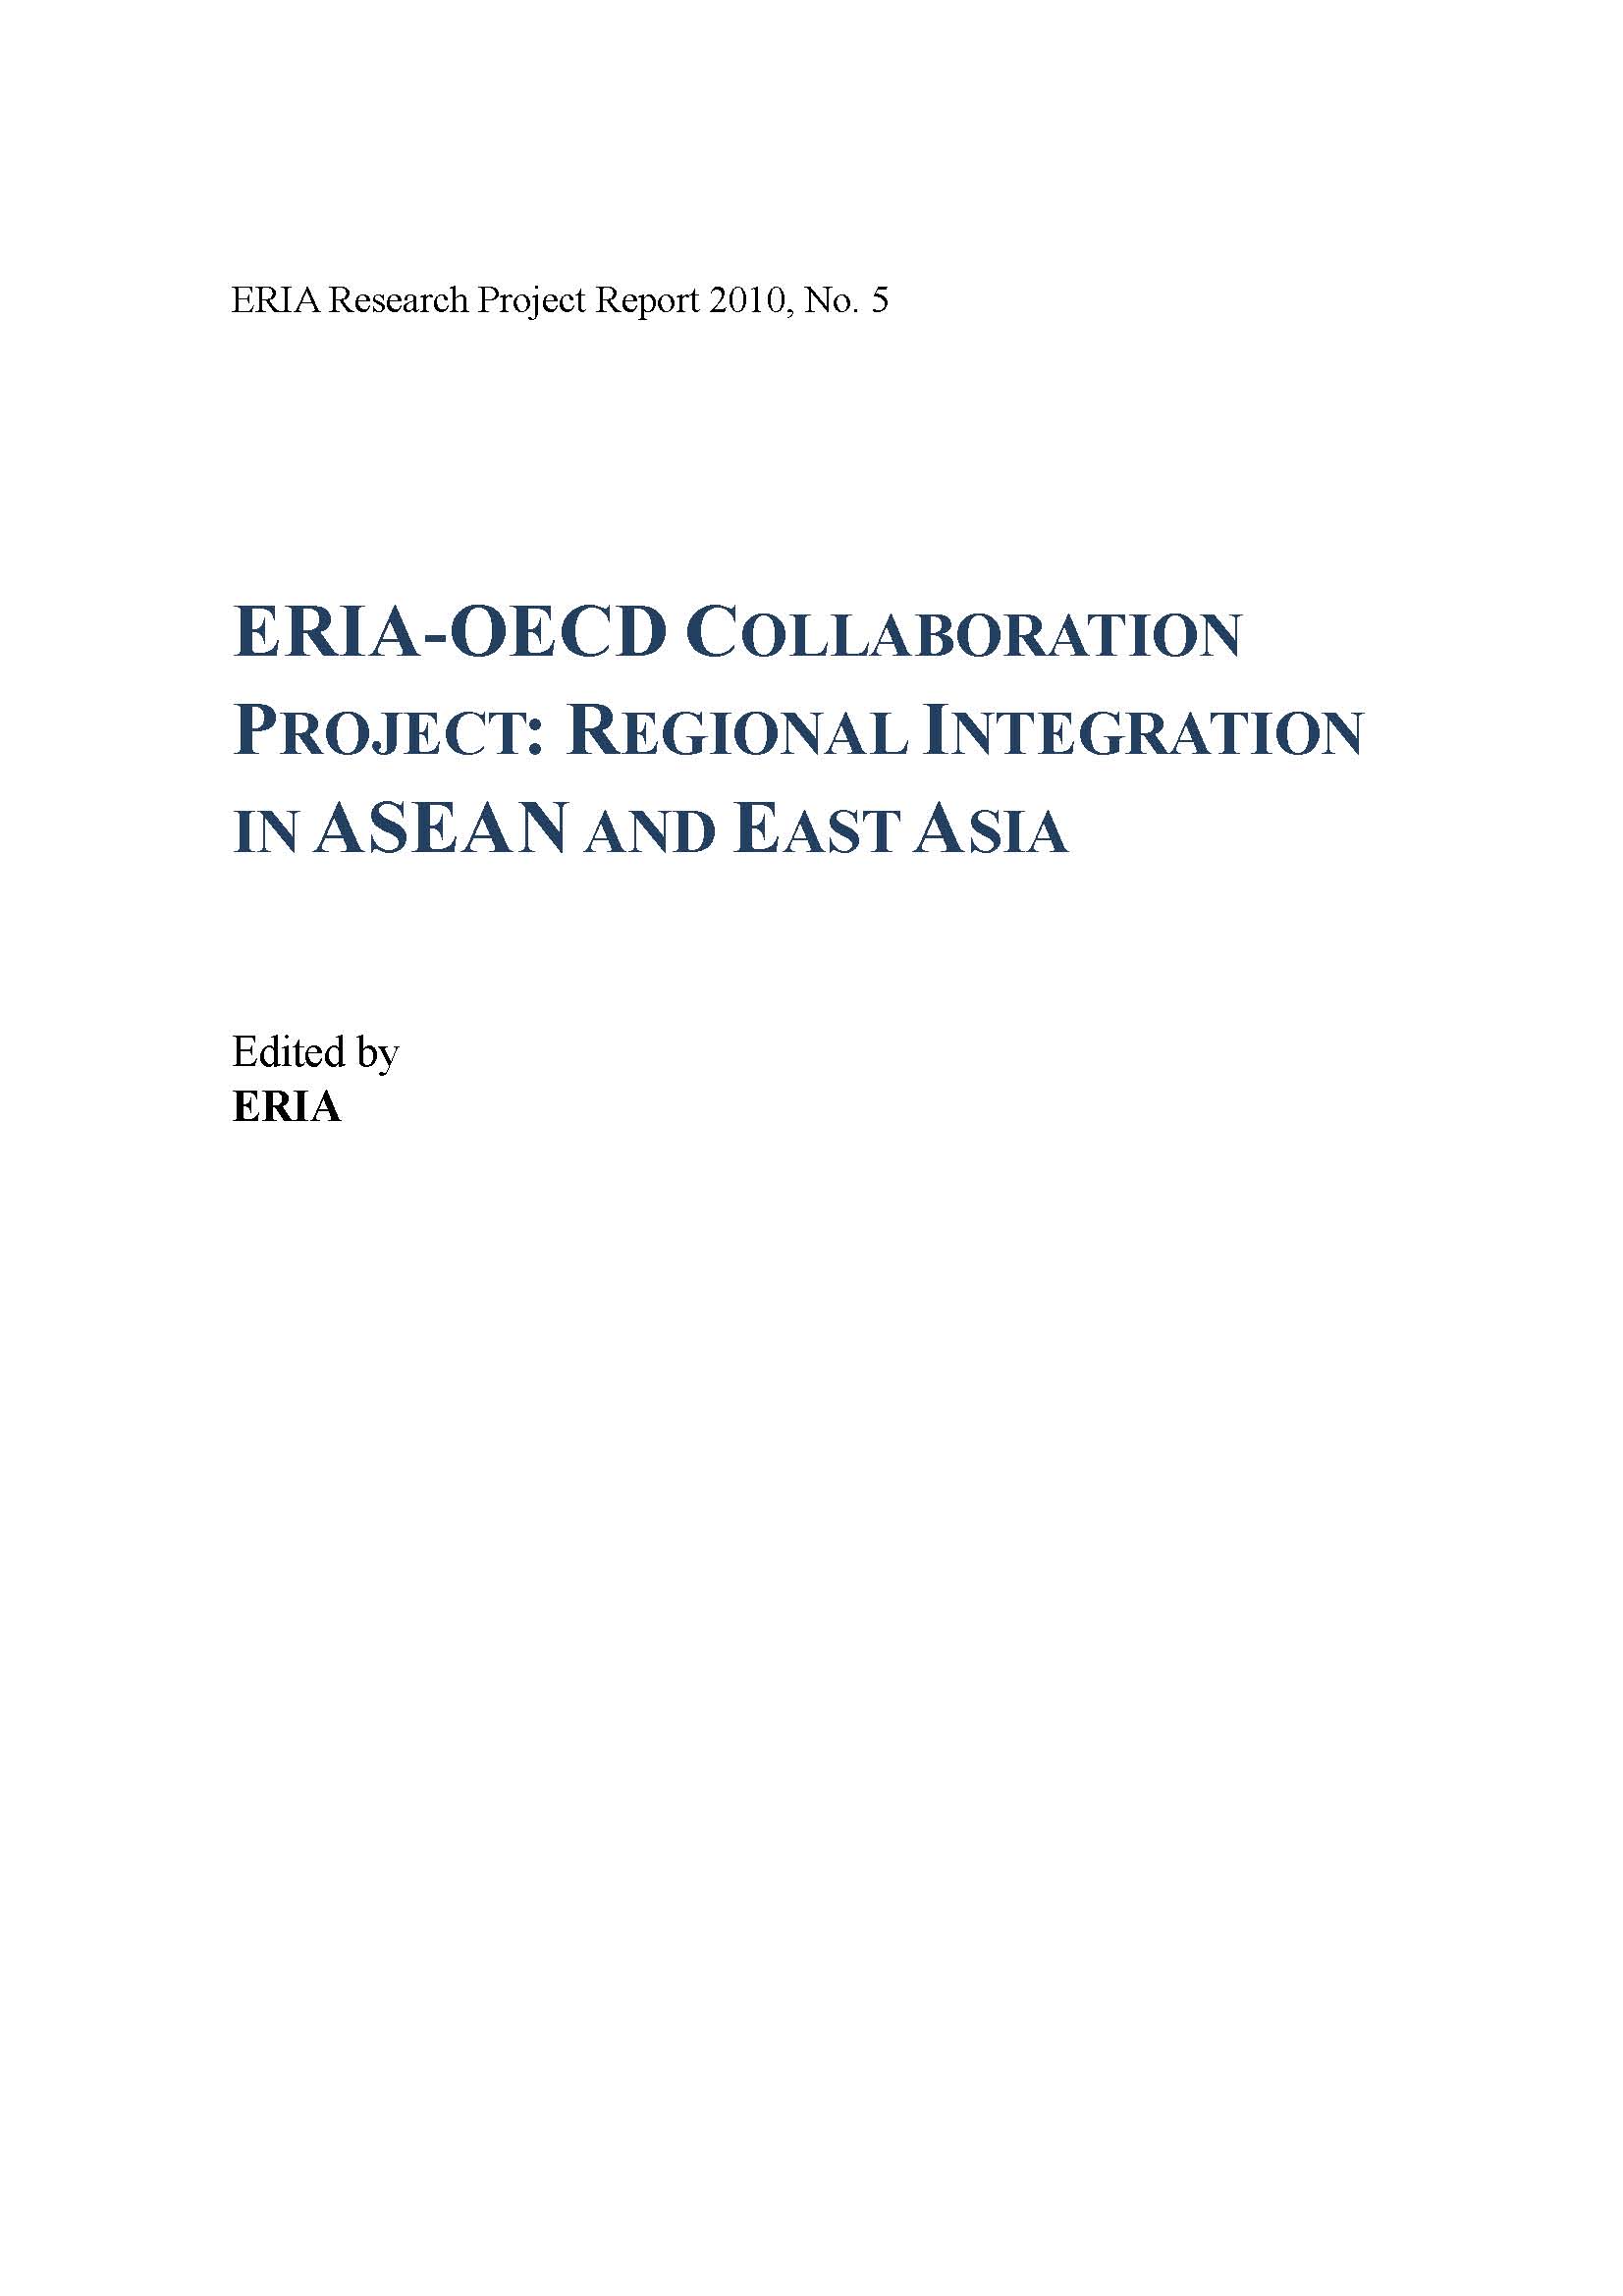 ERIA-OECD Collaboration Project: Regional Integration in ASEAN and East Asia